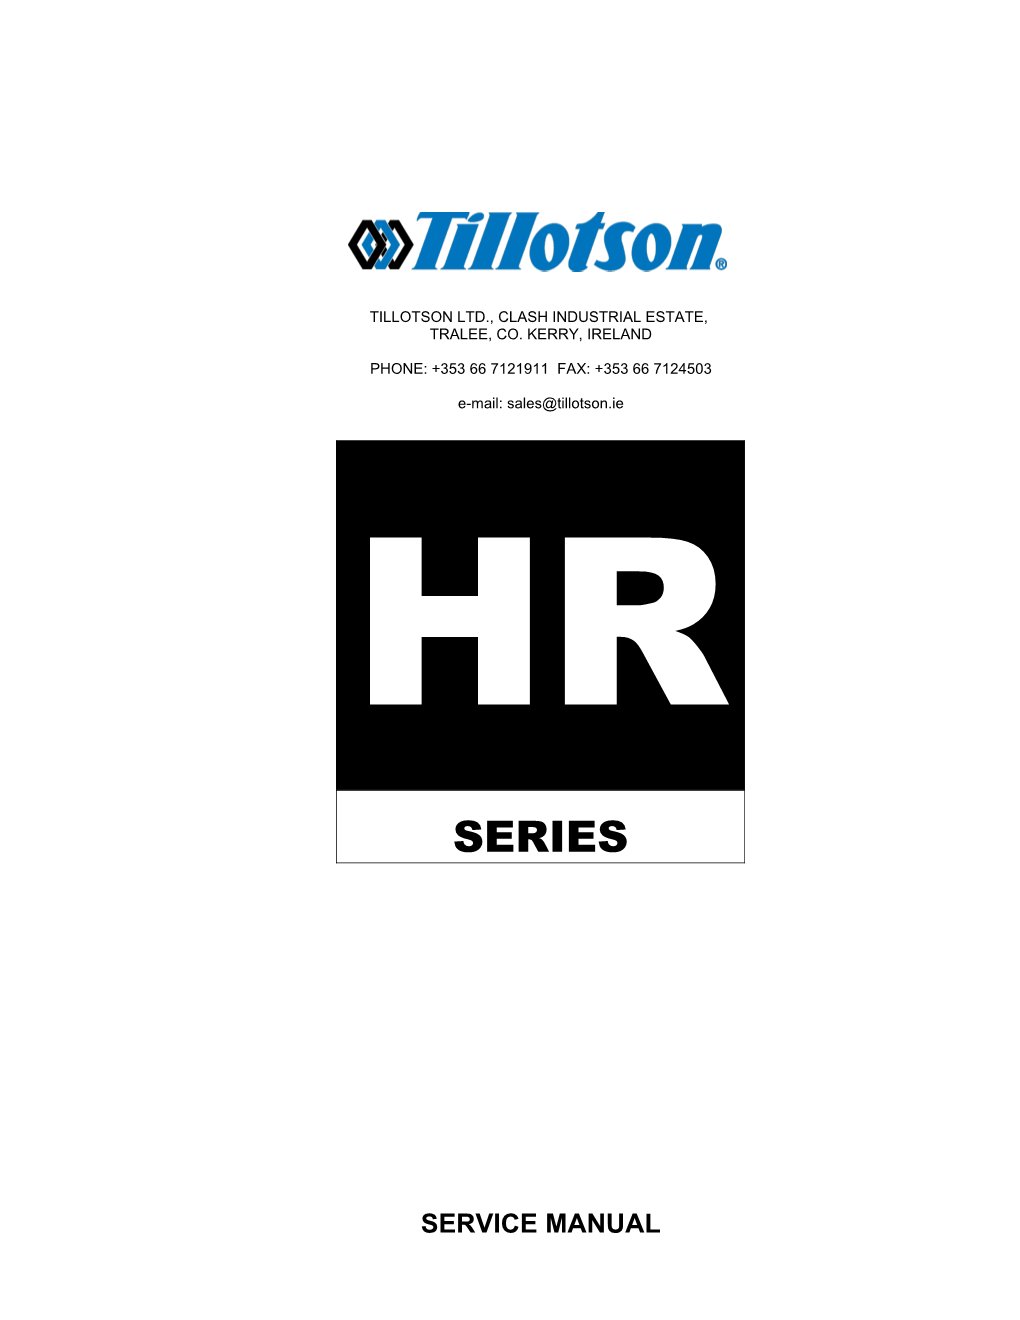 Tillotson Has Developed the HR Series Diaphragm Carburetor for Engines with a Displacement